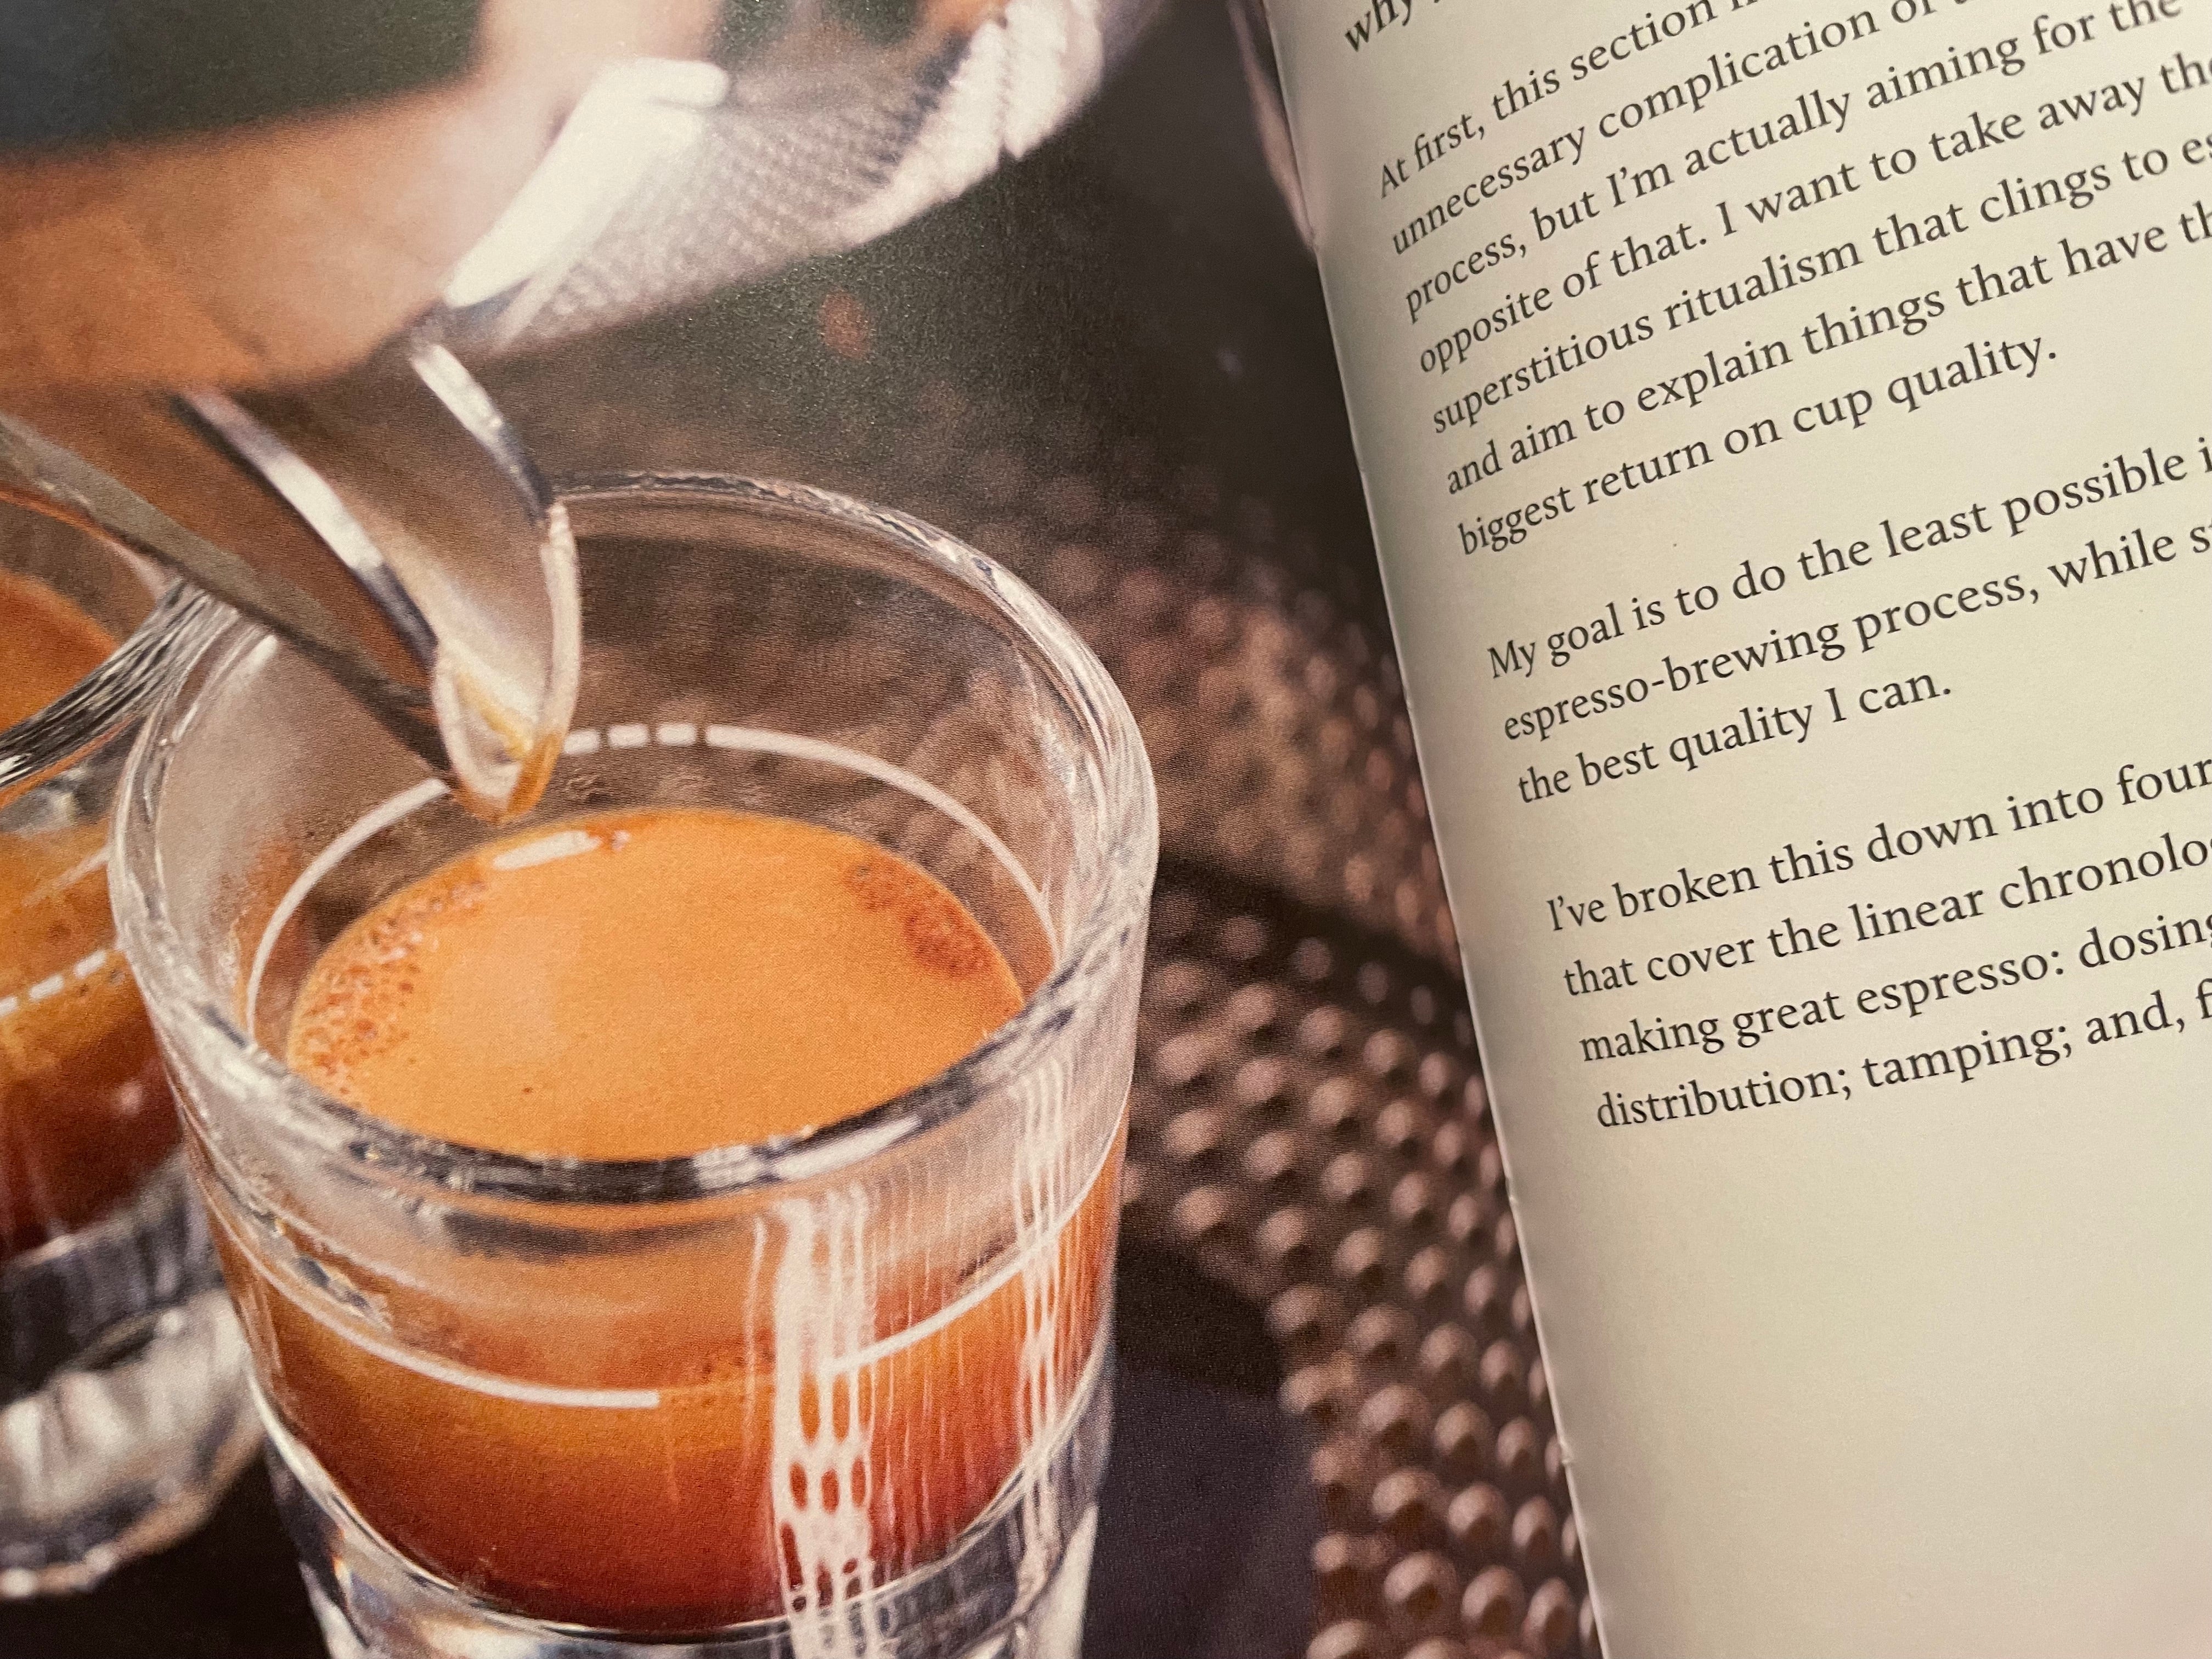 Title: How to make the best coffee at home by James Hoffman